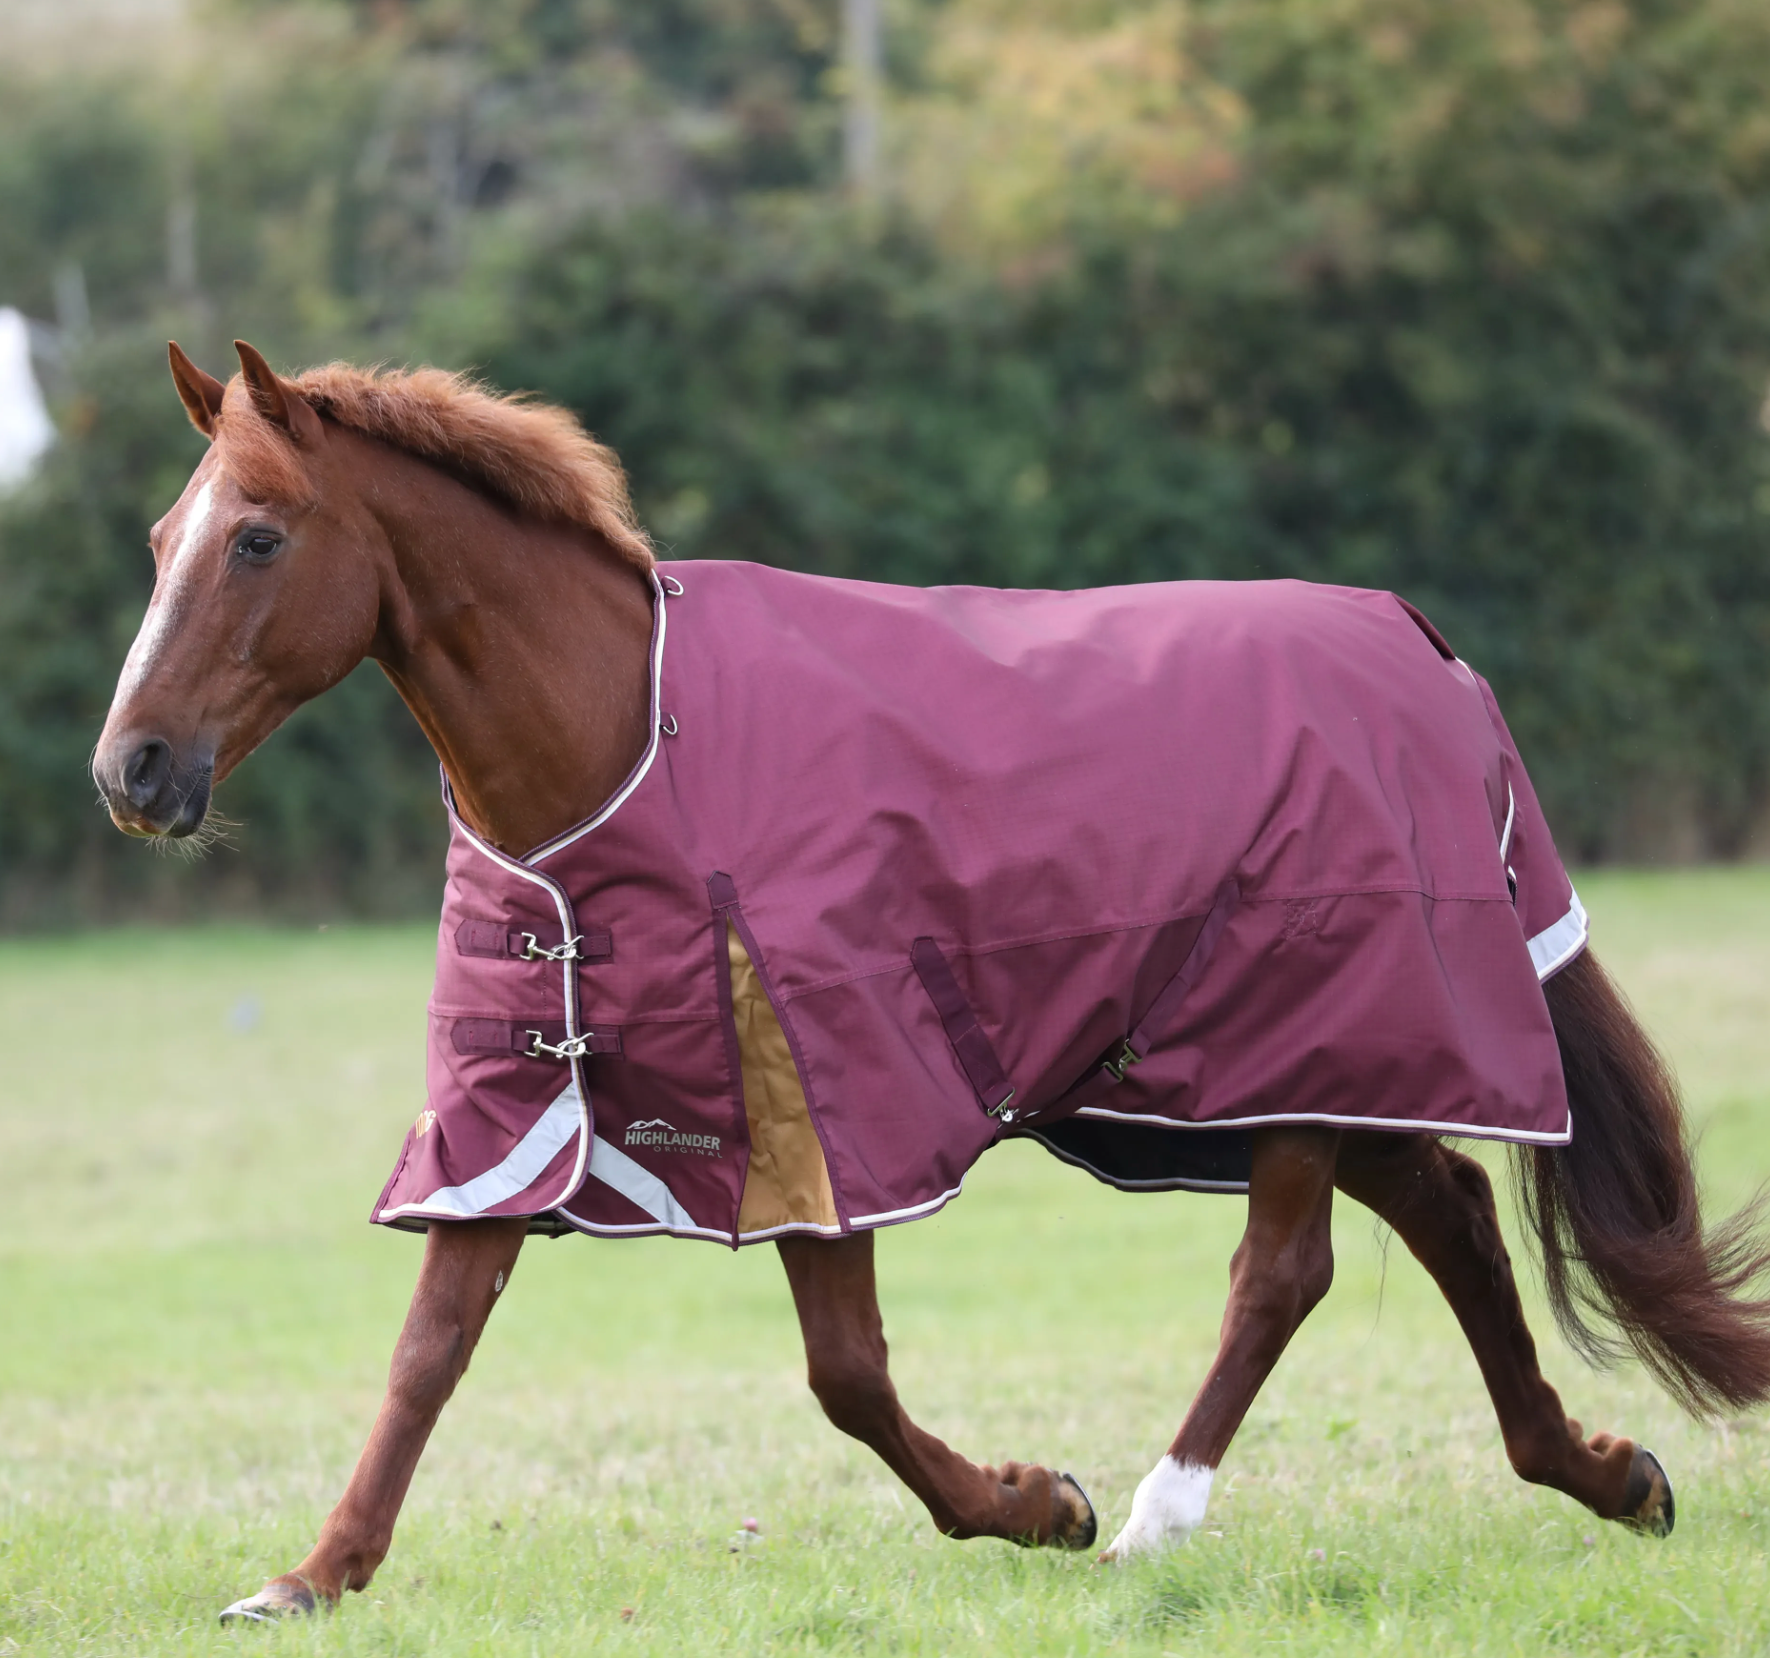 Warm and Comfortable Blankets for Horse by Gee Gee Equine